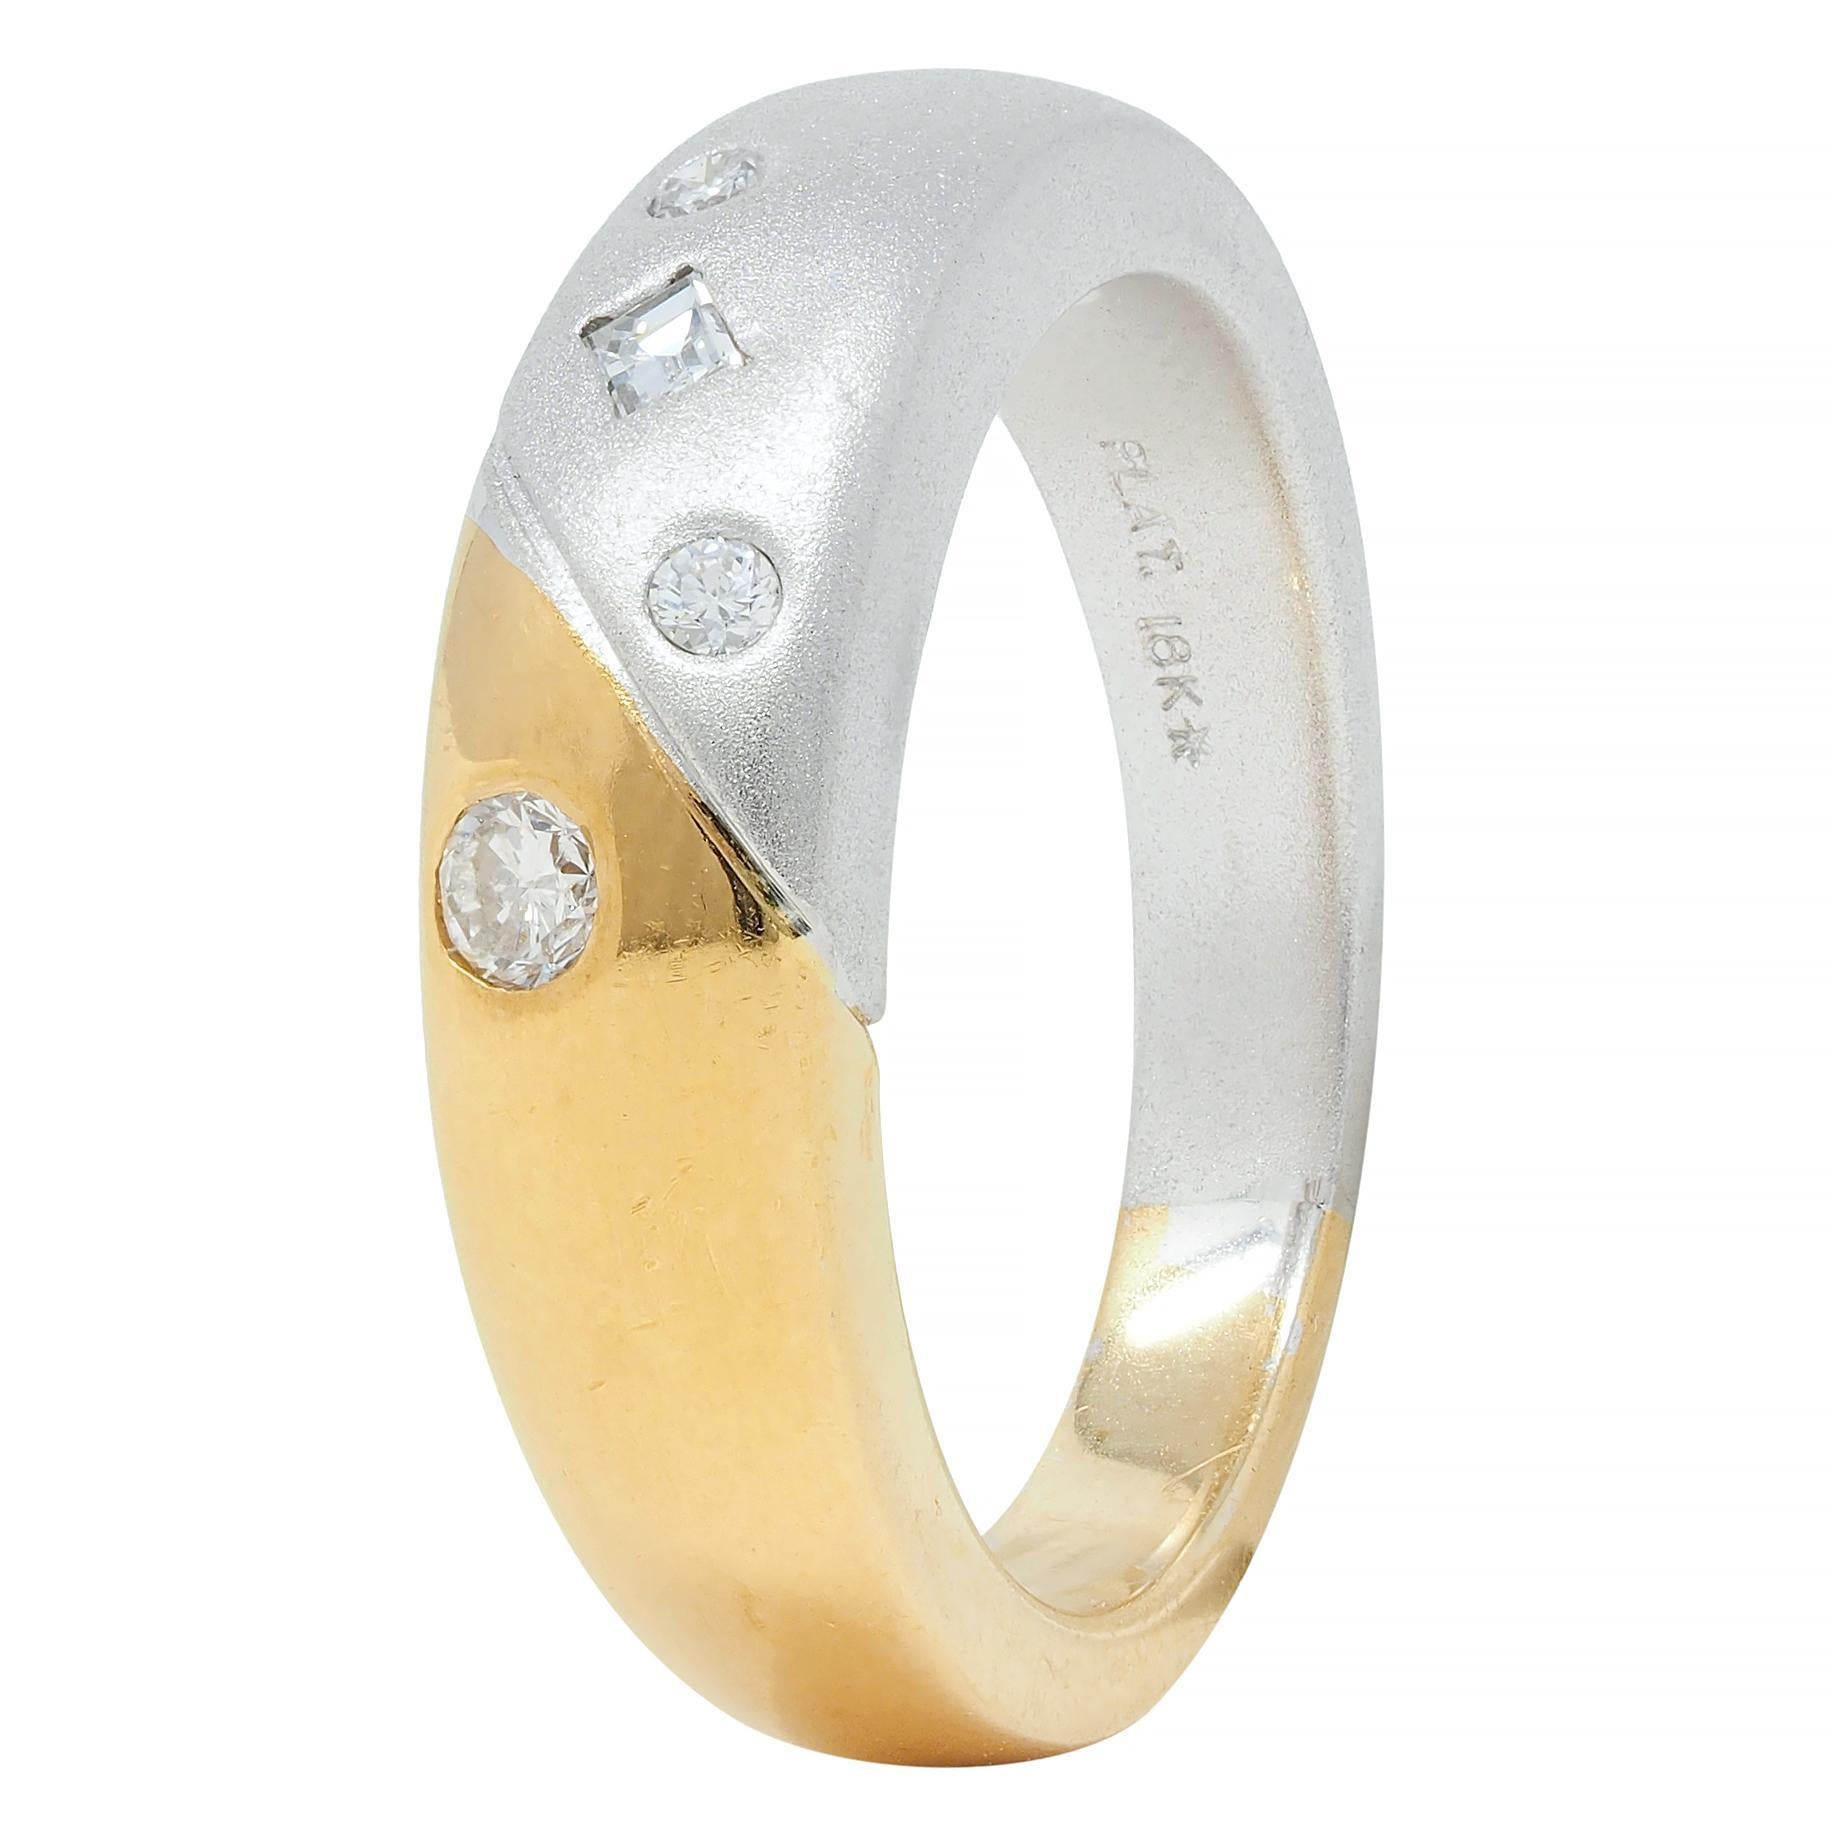 Featuring one half matte platinum and the other high polished yellow gold 
Meeting at grooved slash motif in center - with diamonds throughout
Step and round brilliant cut weighing approximately 0.15 carat total
Eye clean and bright - flush set in